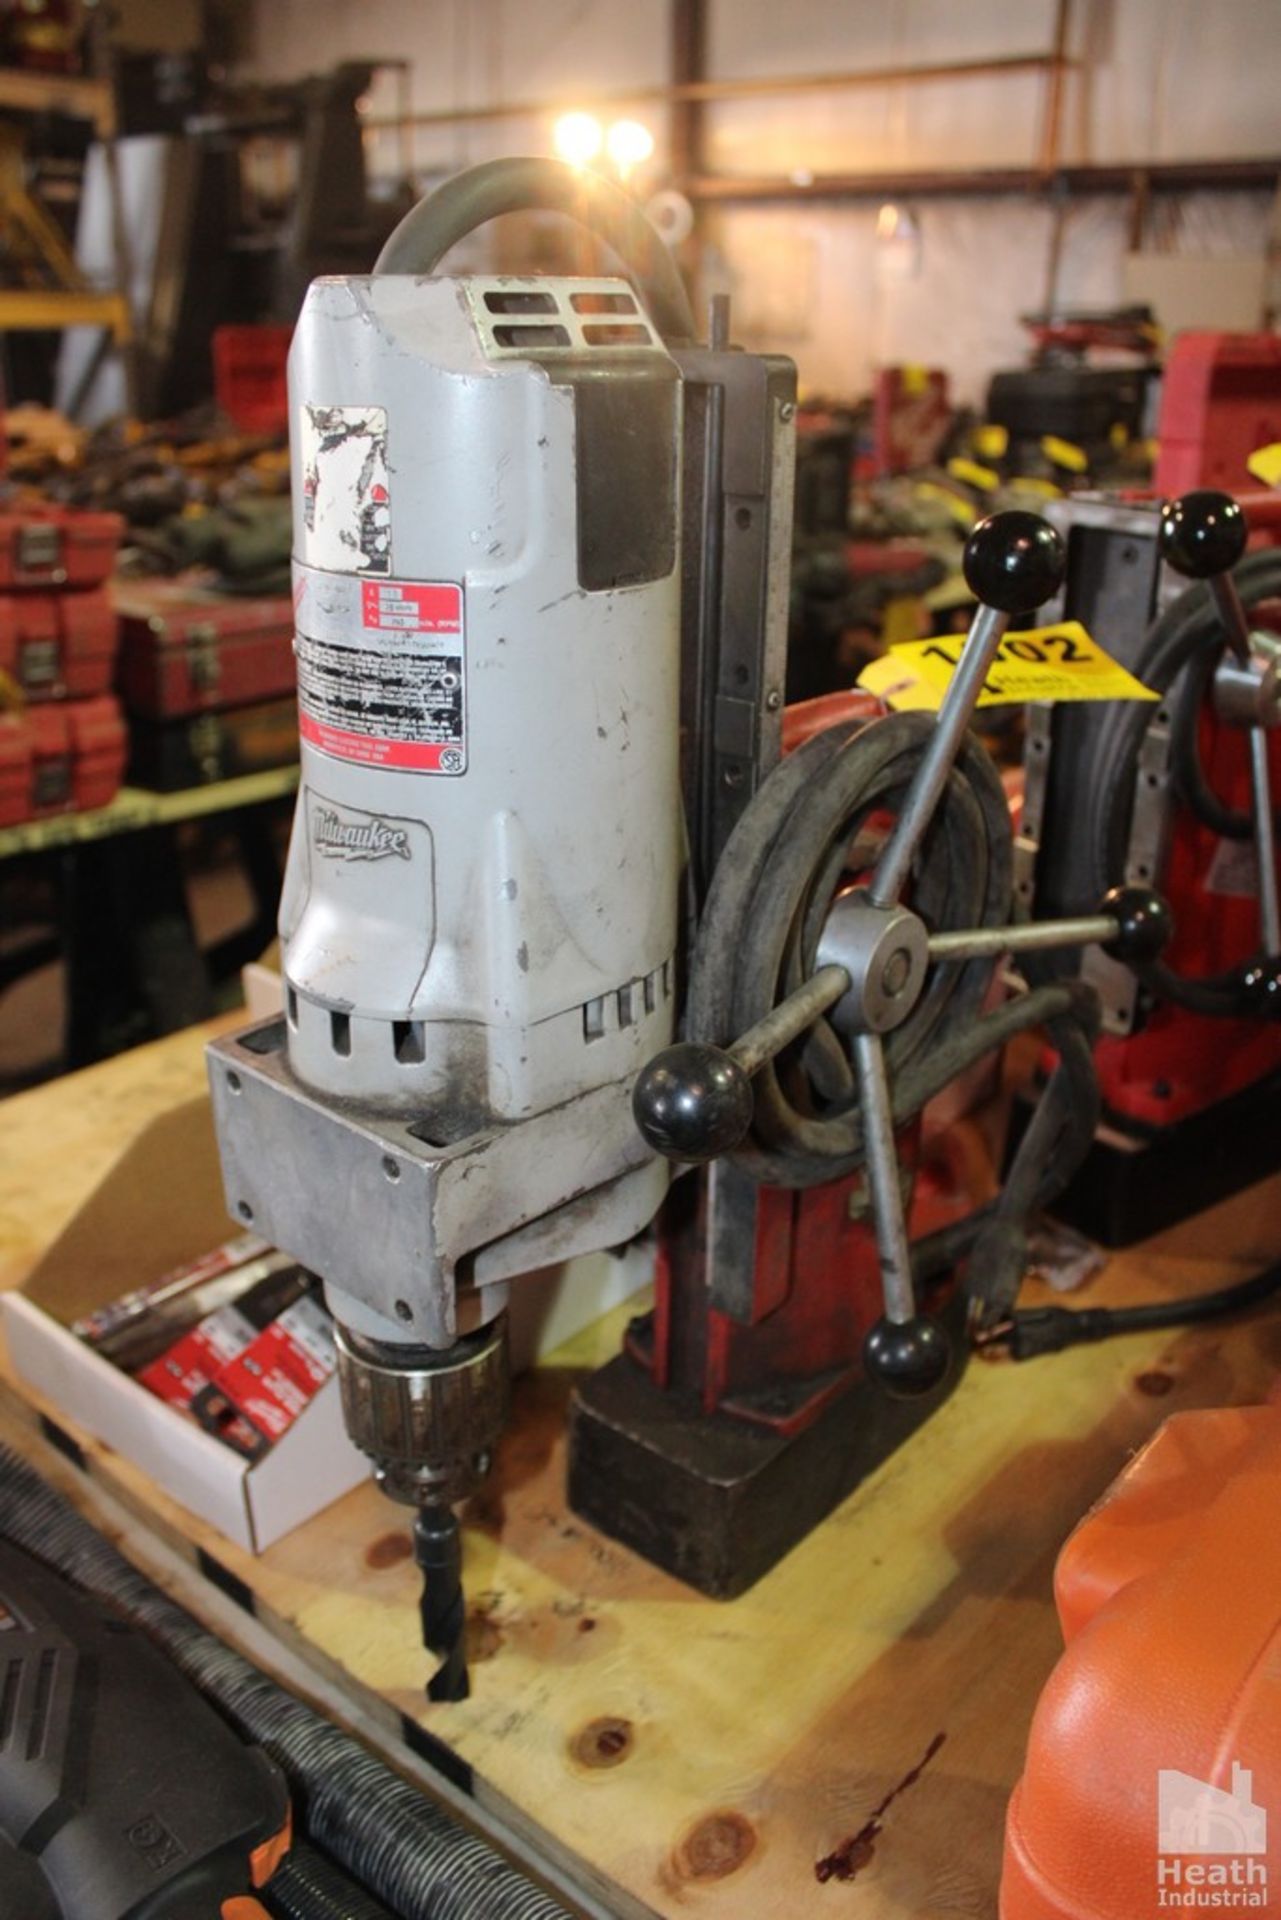 MILWAUKEE NO. 4202 ELECTROMAGNETIC MAG BASE DRILL